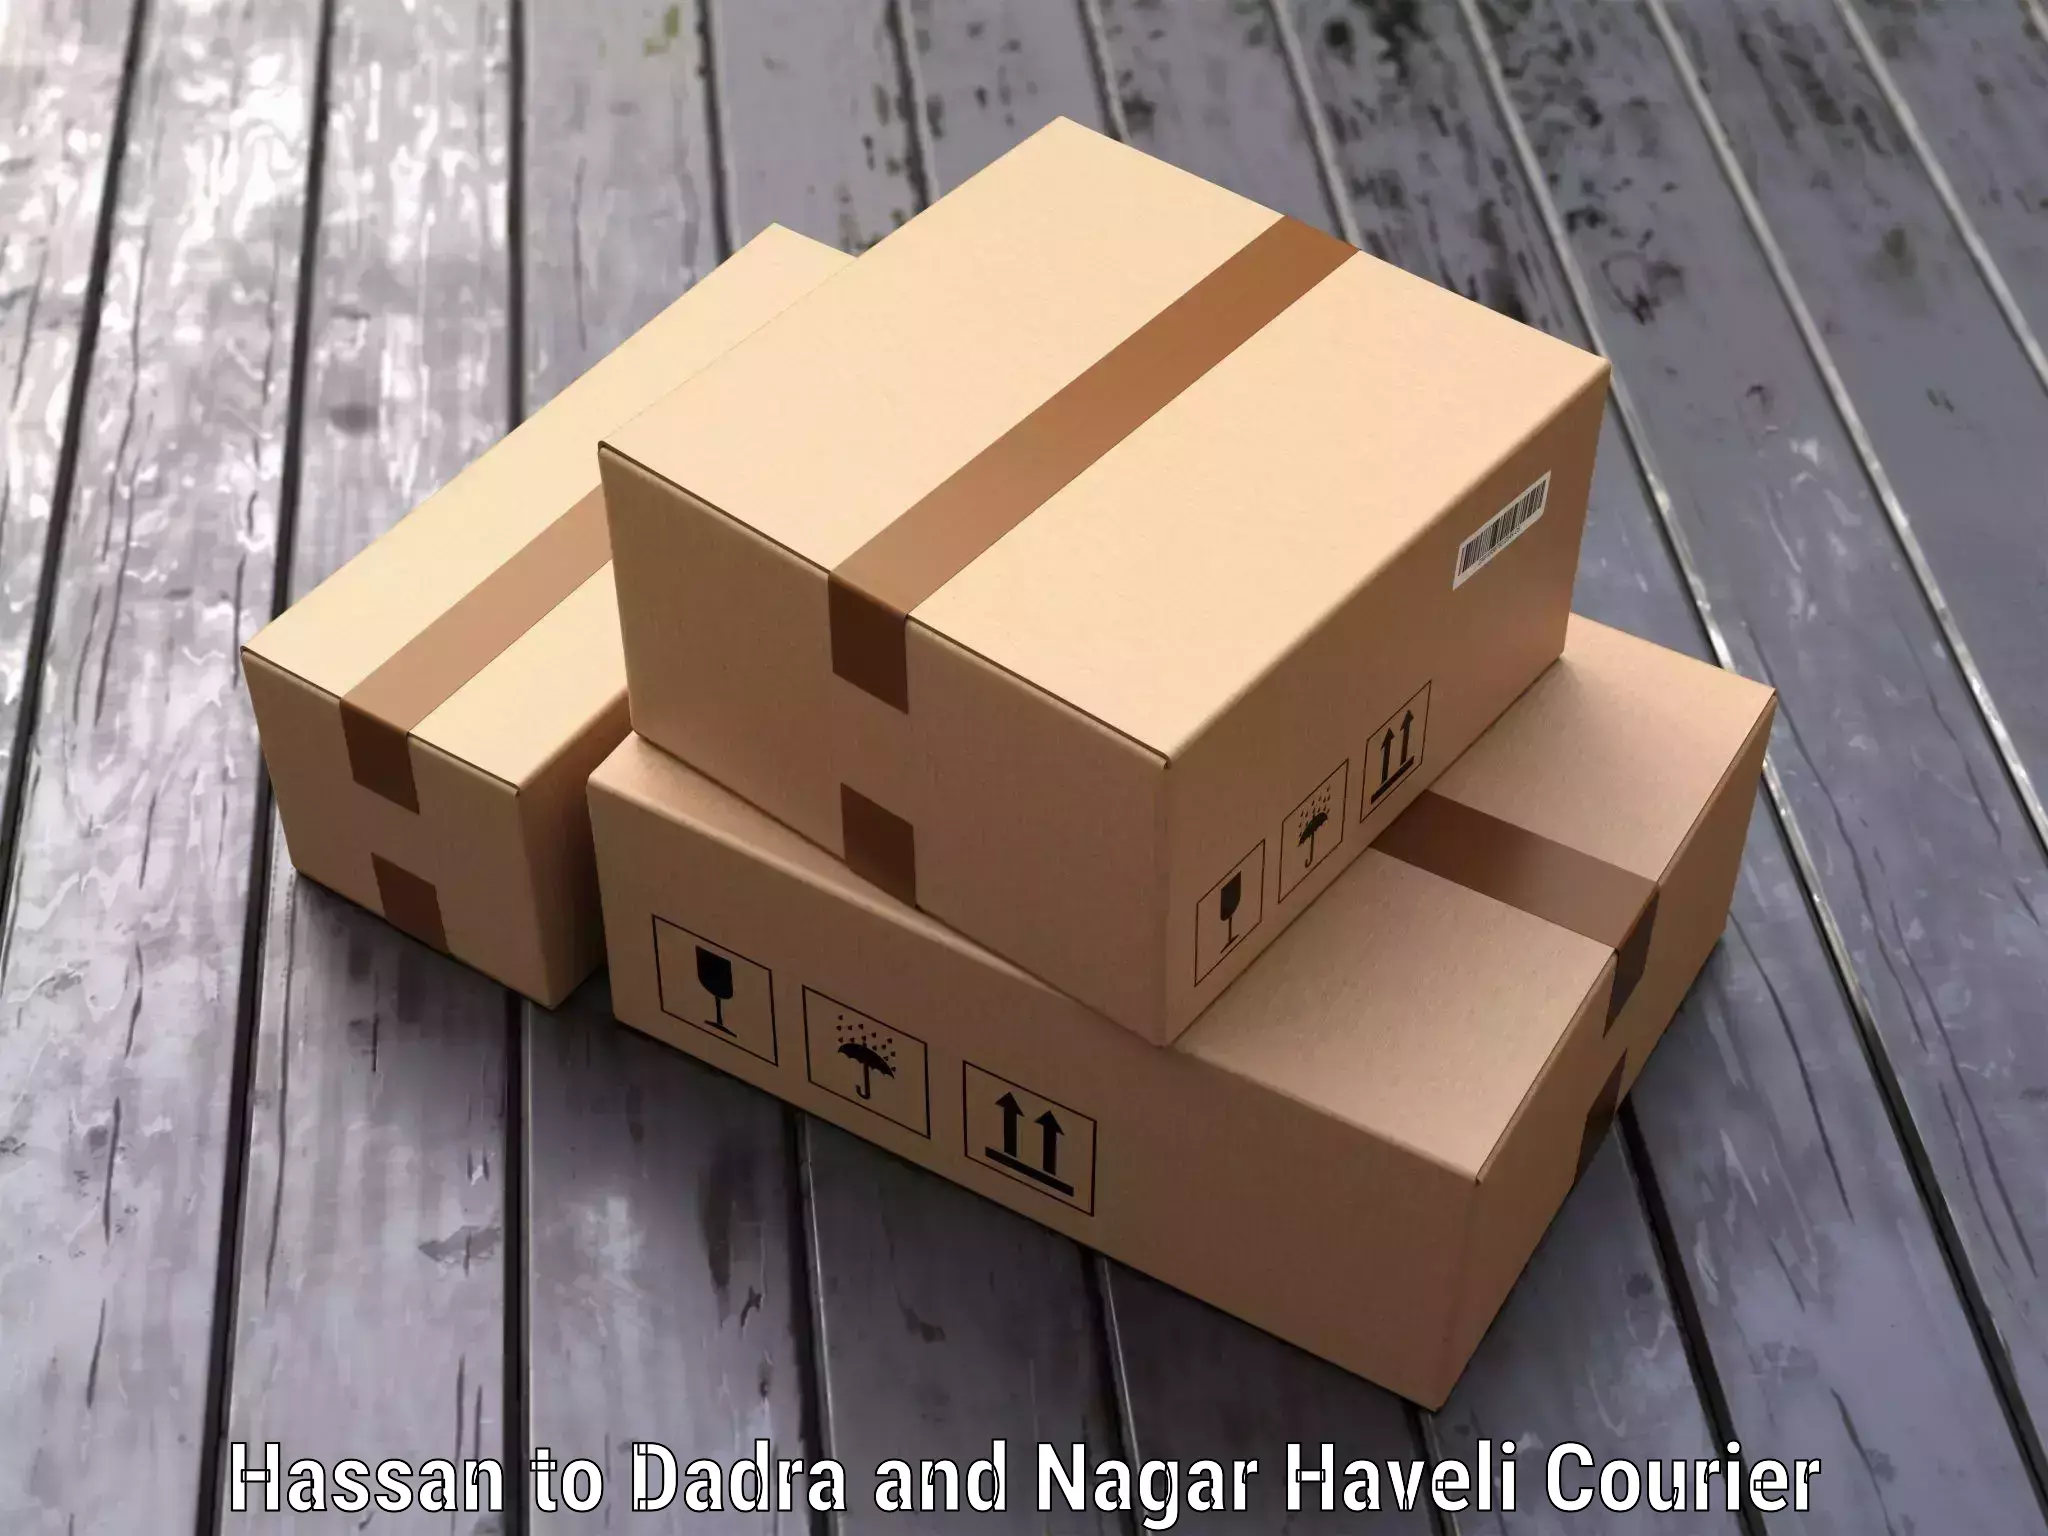 Personal effects shipping in Hassan to Dadra and Nagar Haveli